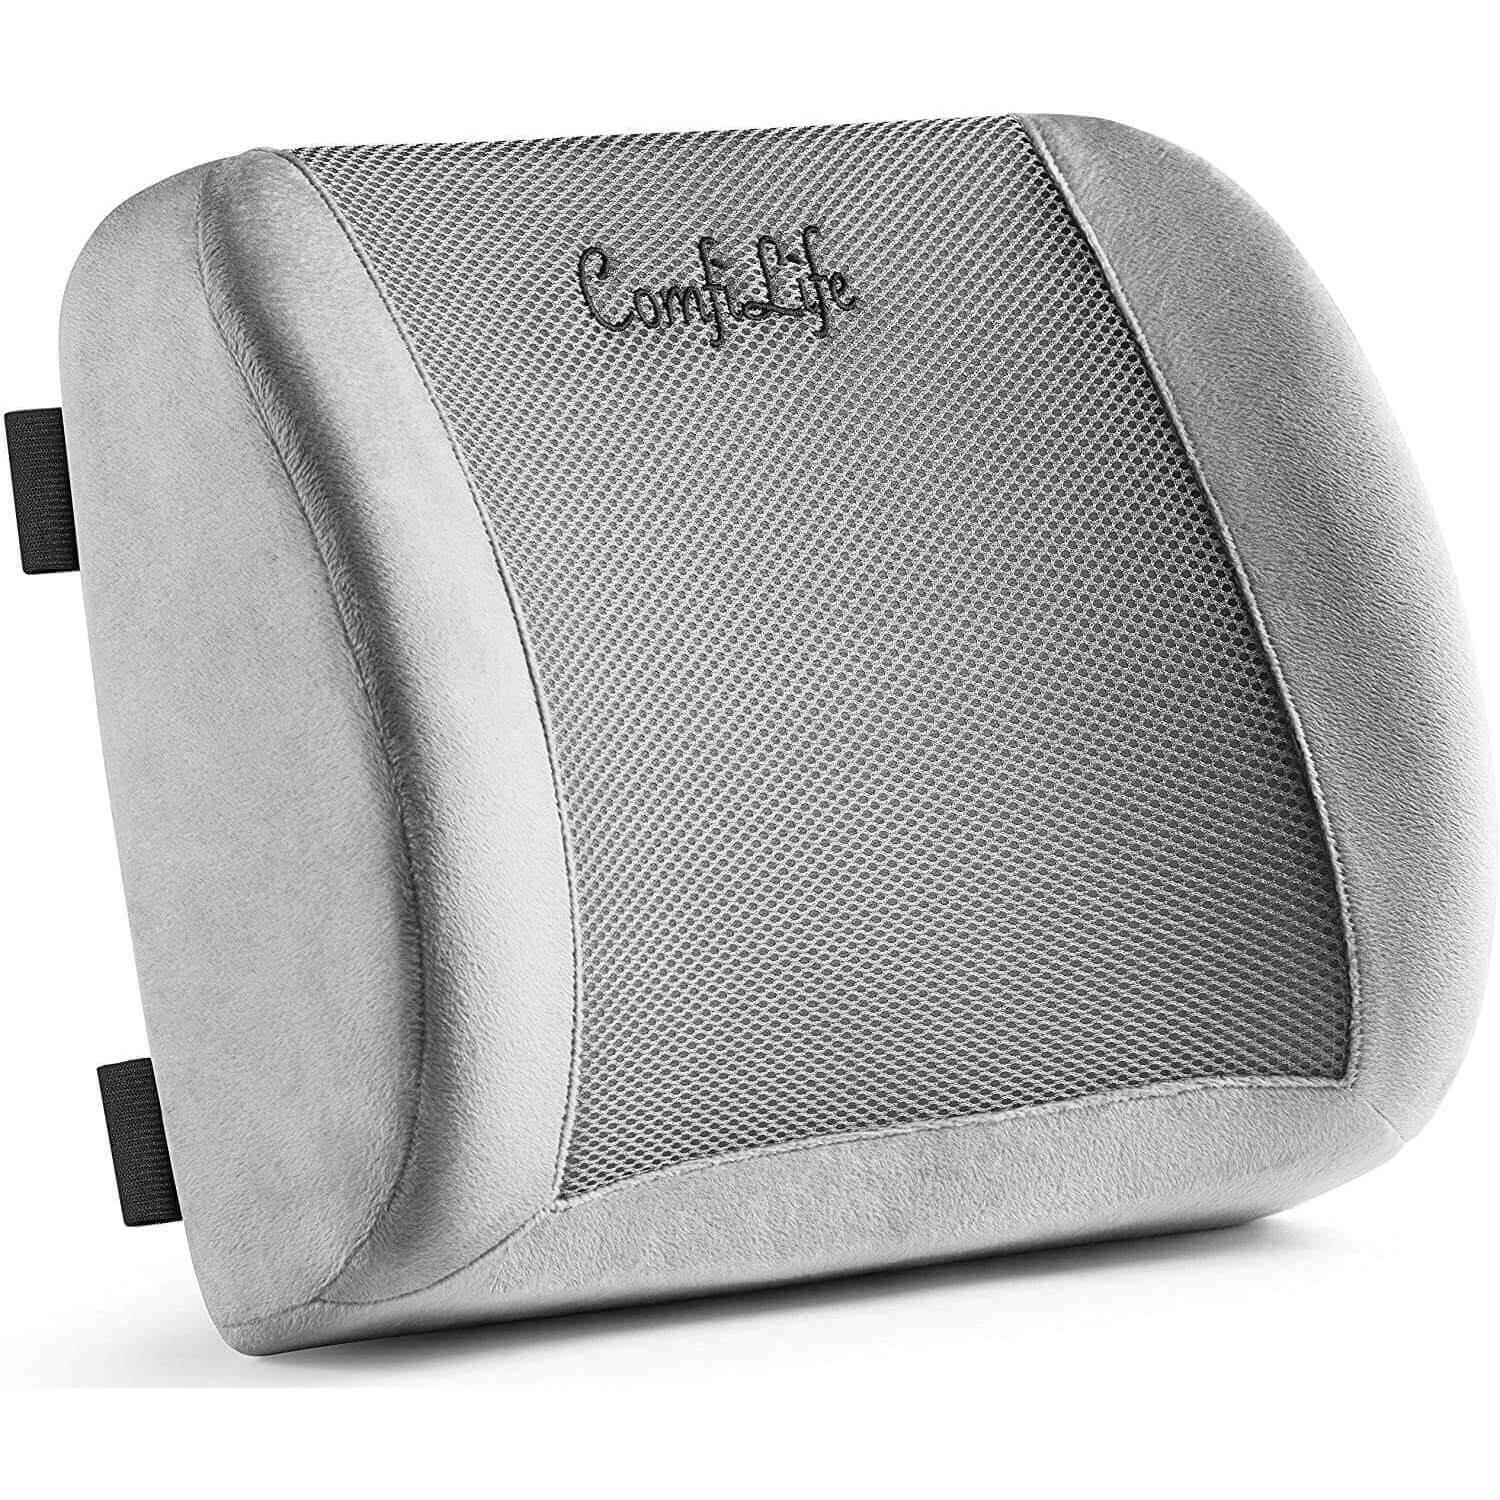 https://comfilife.com/wp-content/uploads/2021/01/ComfiLife-Lumbar-Support-Back-Pillow-Office-Chair-and-Car-Seat-Cushion_gray_01_square.jpg